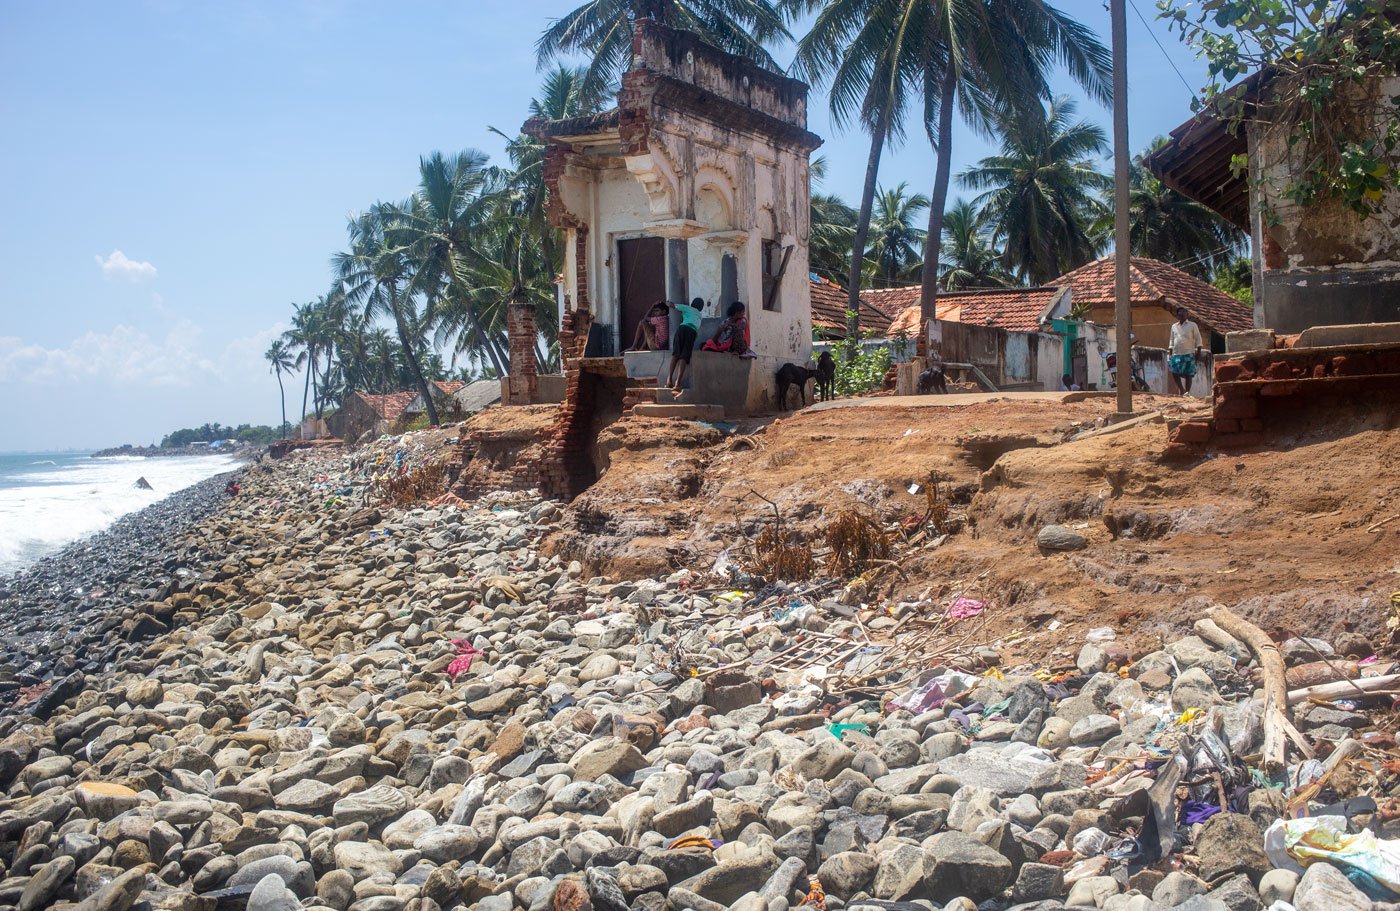 Maramma’s old family home by the sea in 2019. It was washed away in 2021, in the aftermath of Cyclone Gulab.